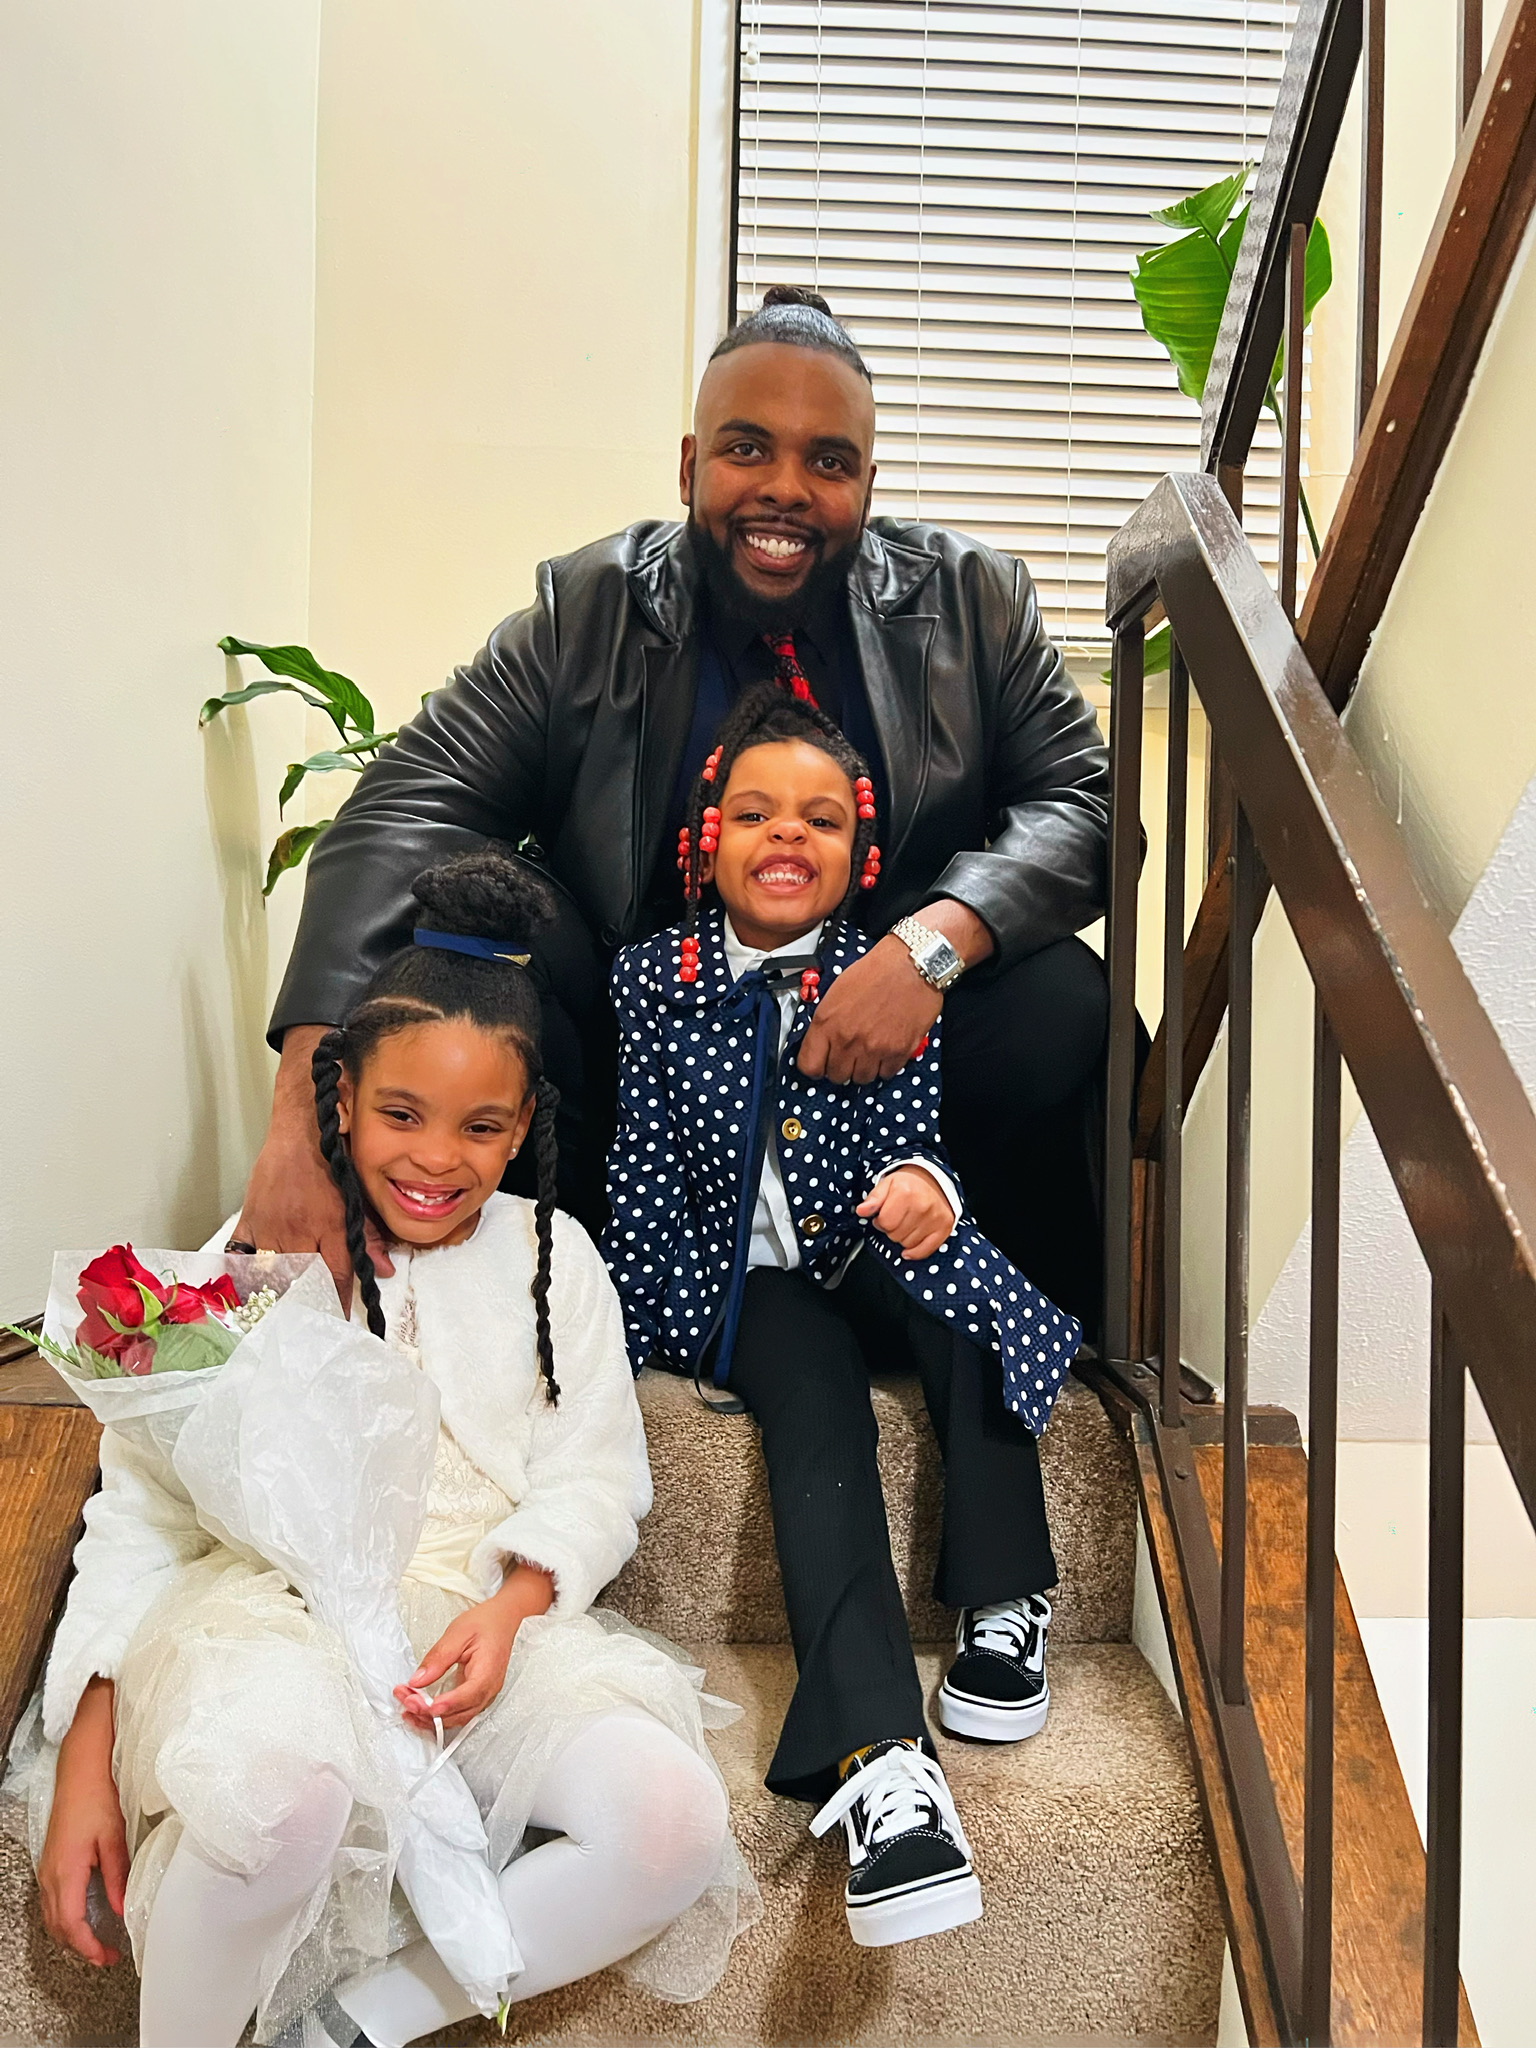 Single Dad Terry Jones on fatherhood and positivity for SIngle Dad Defined.